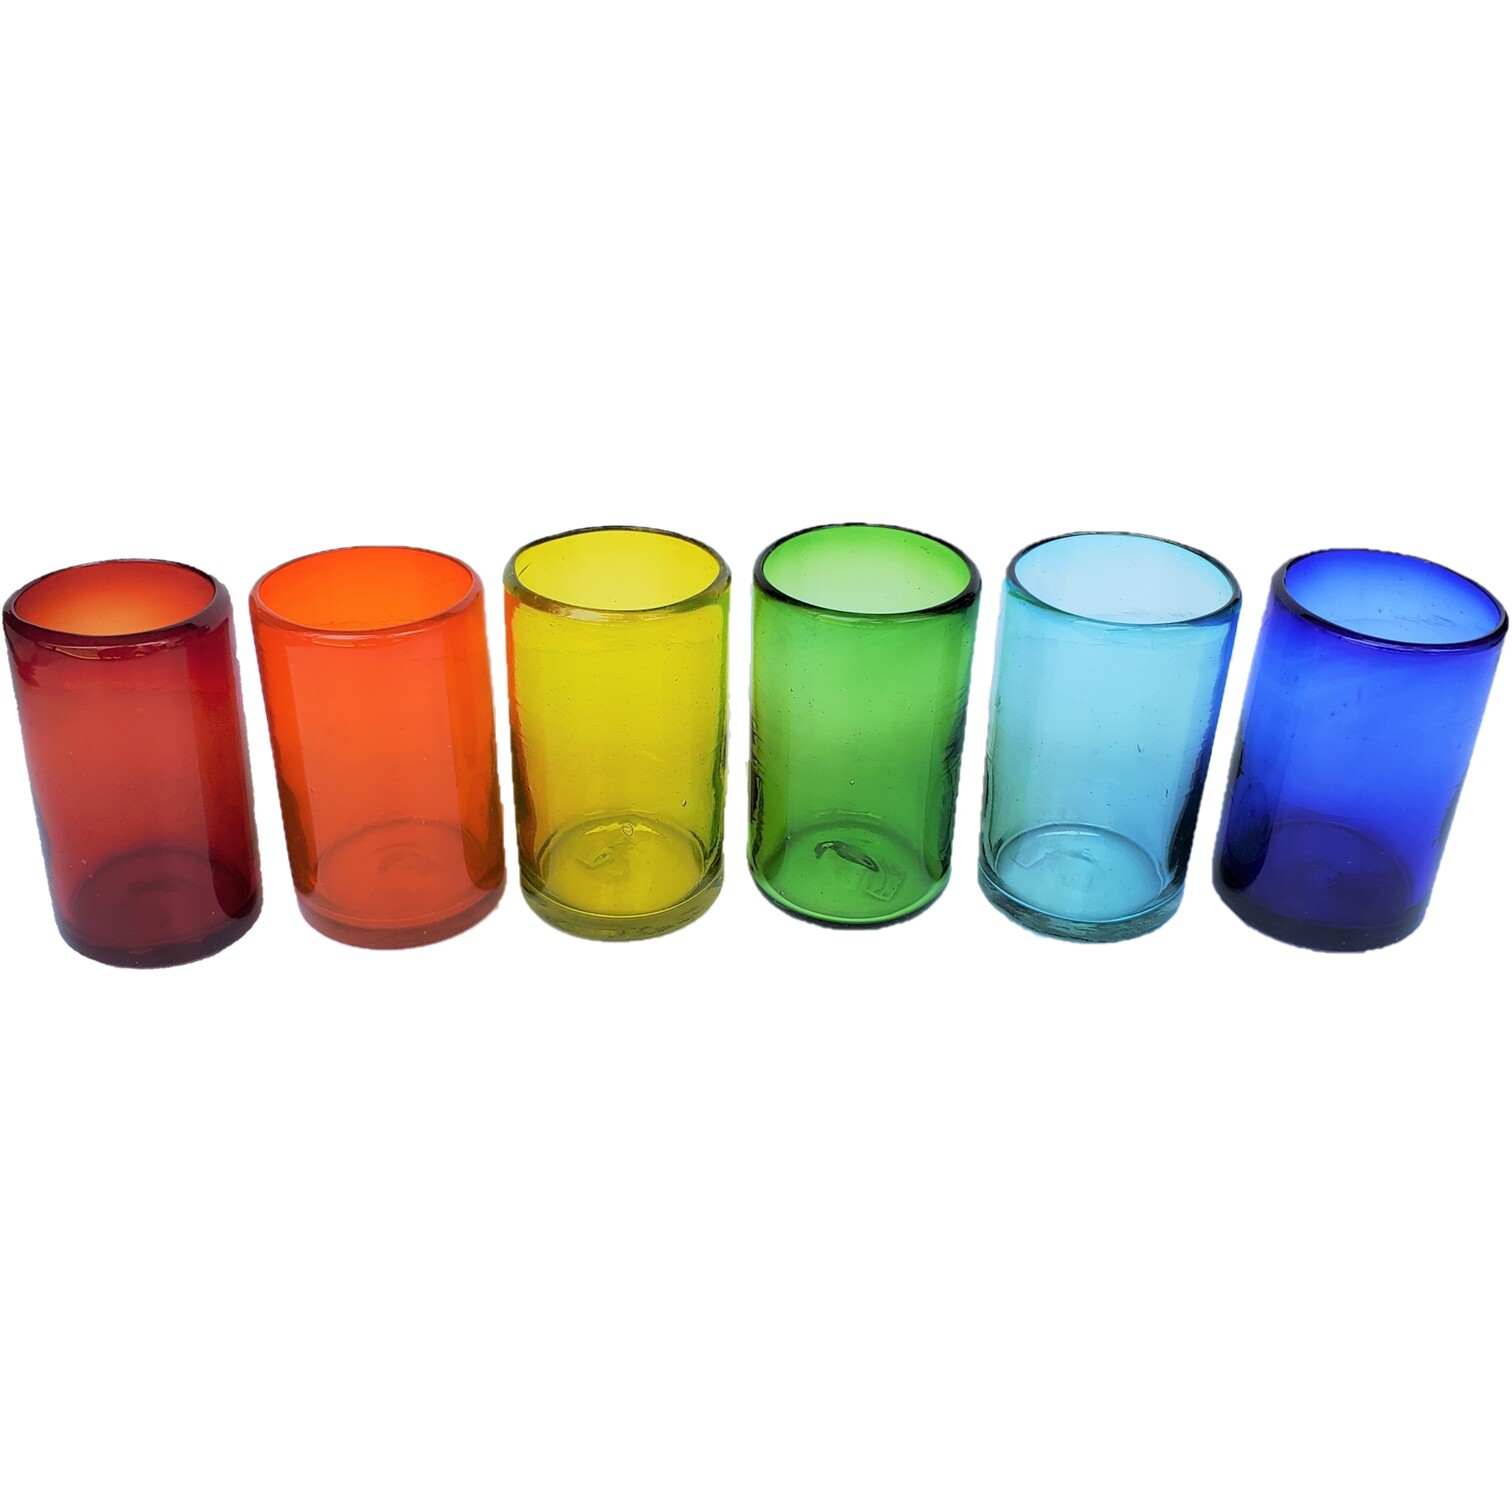 MEXICAN GLASSWARE / Rainbow Colored drinking glasses (set of 6)